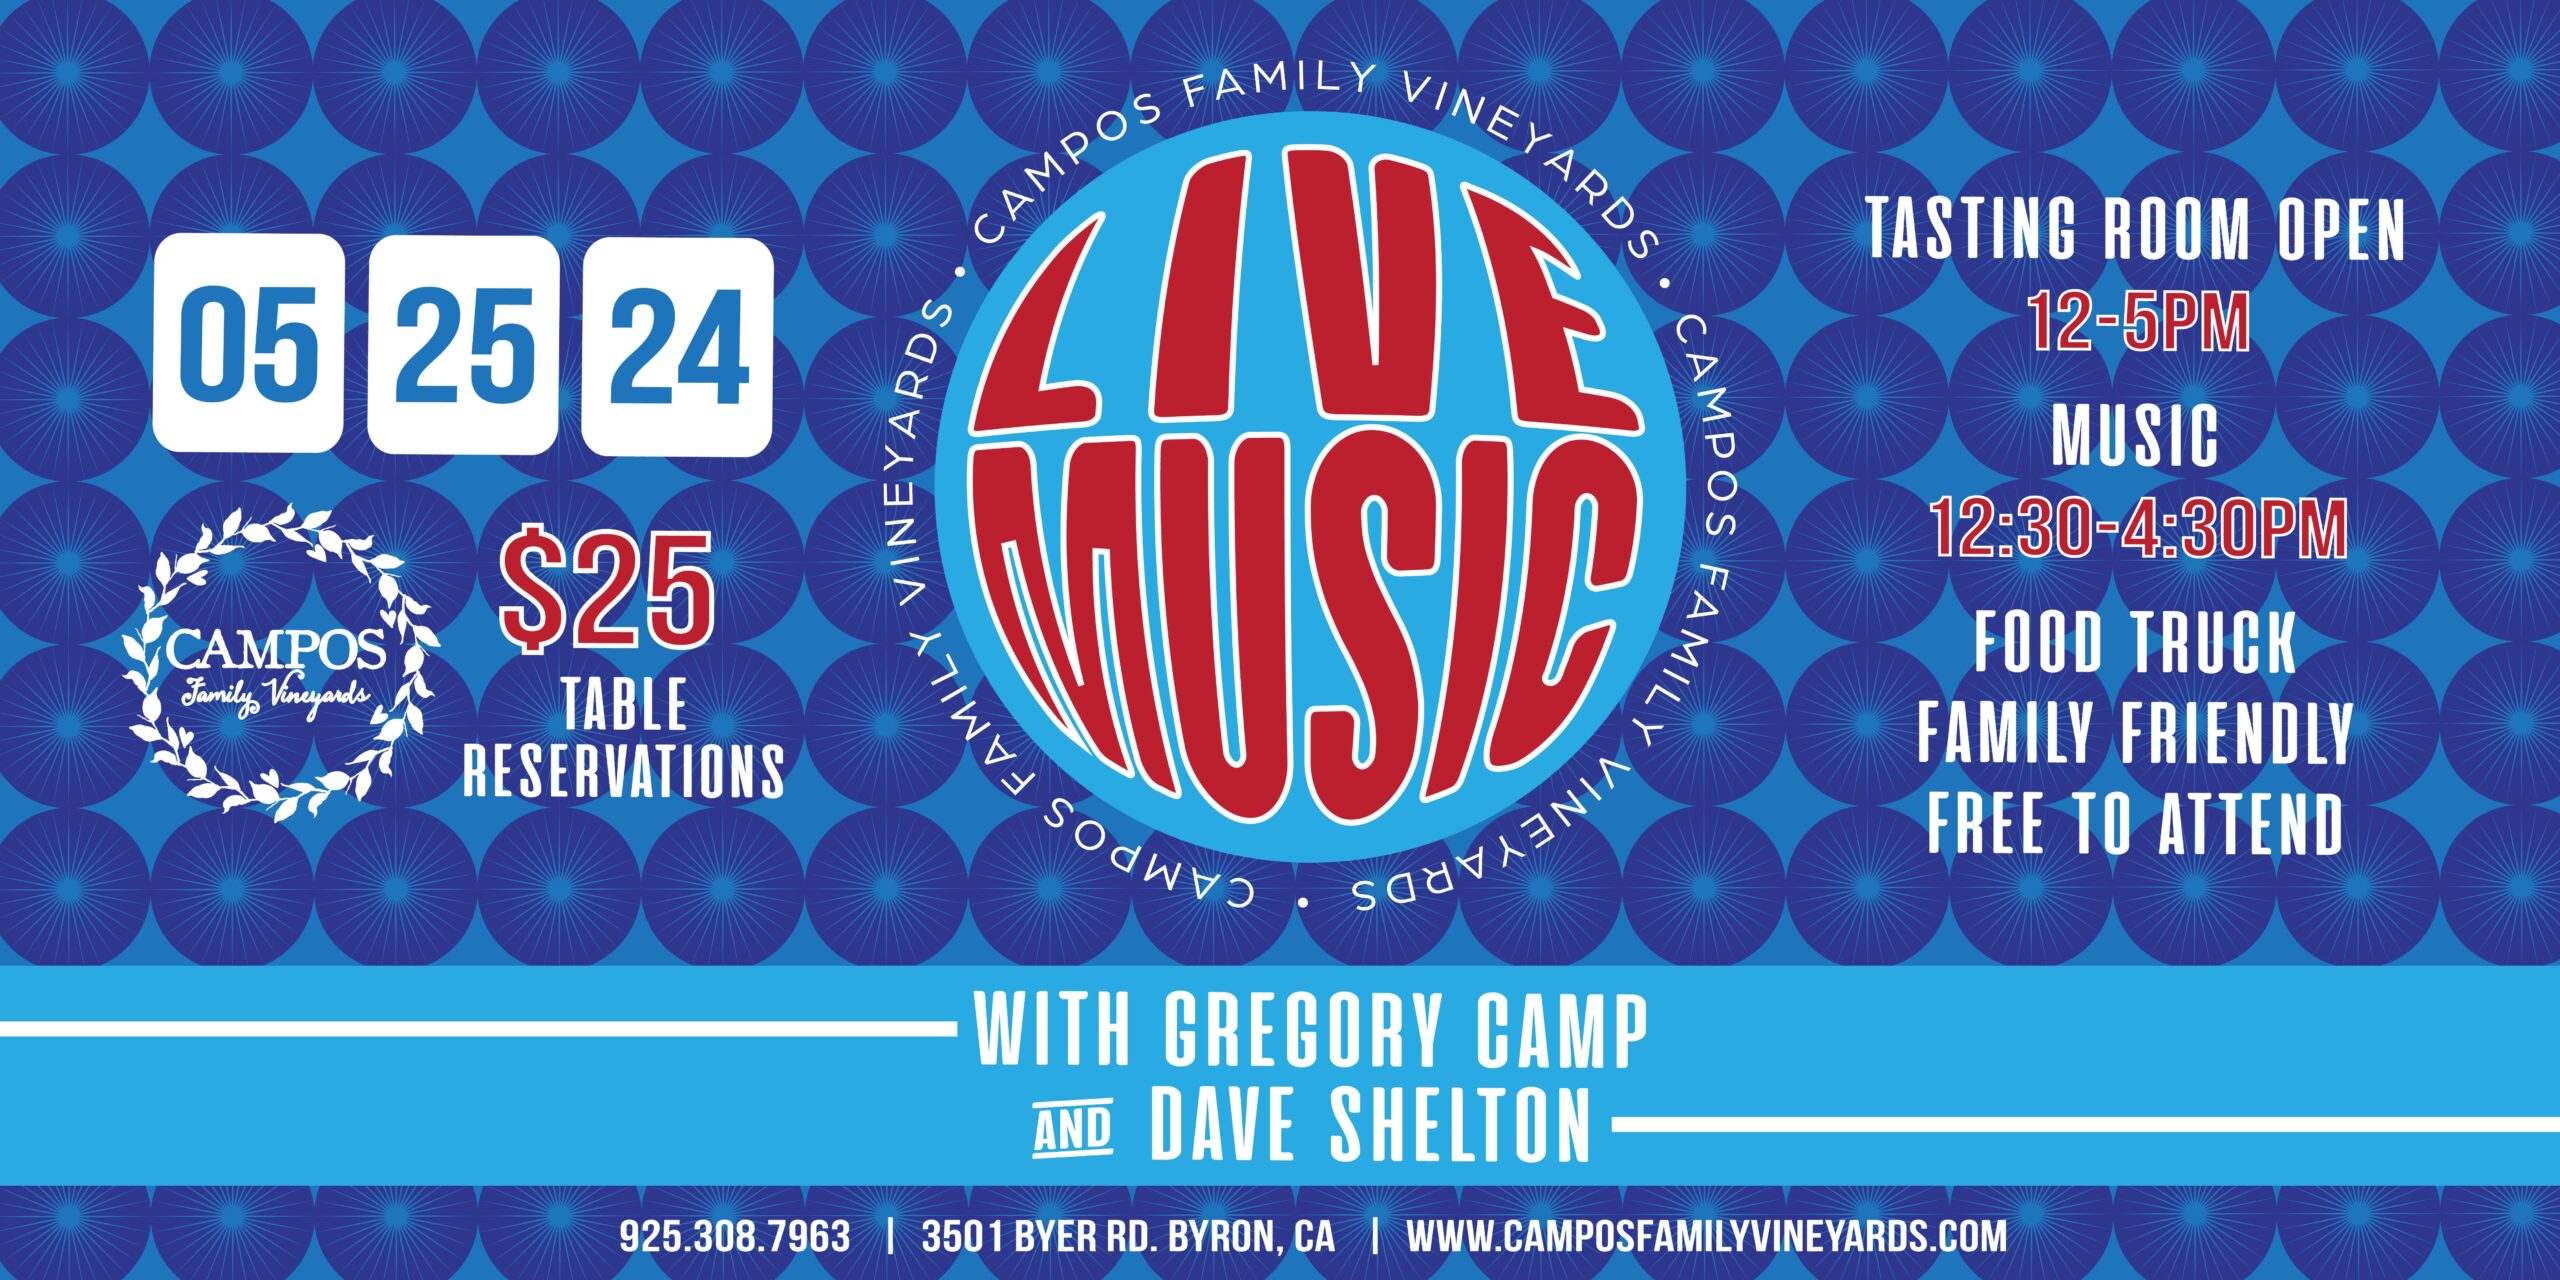 LIVE MUSIC with Gregory Camp and Dave Shelton!